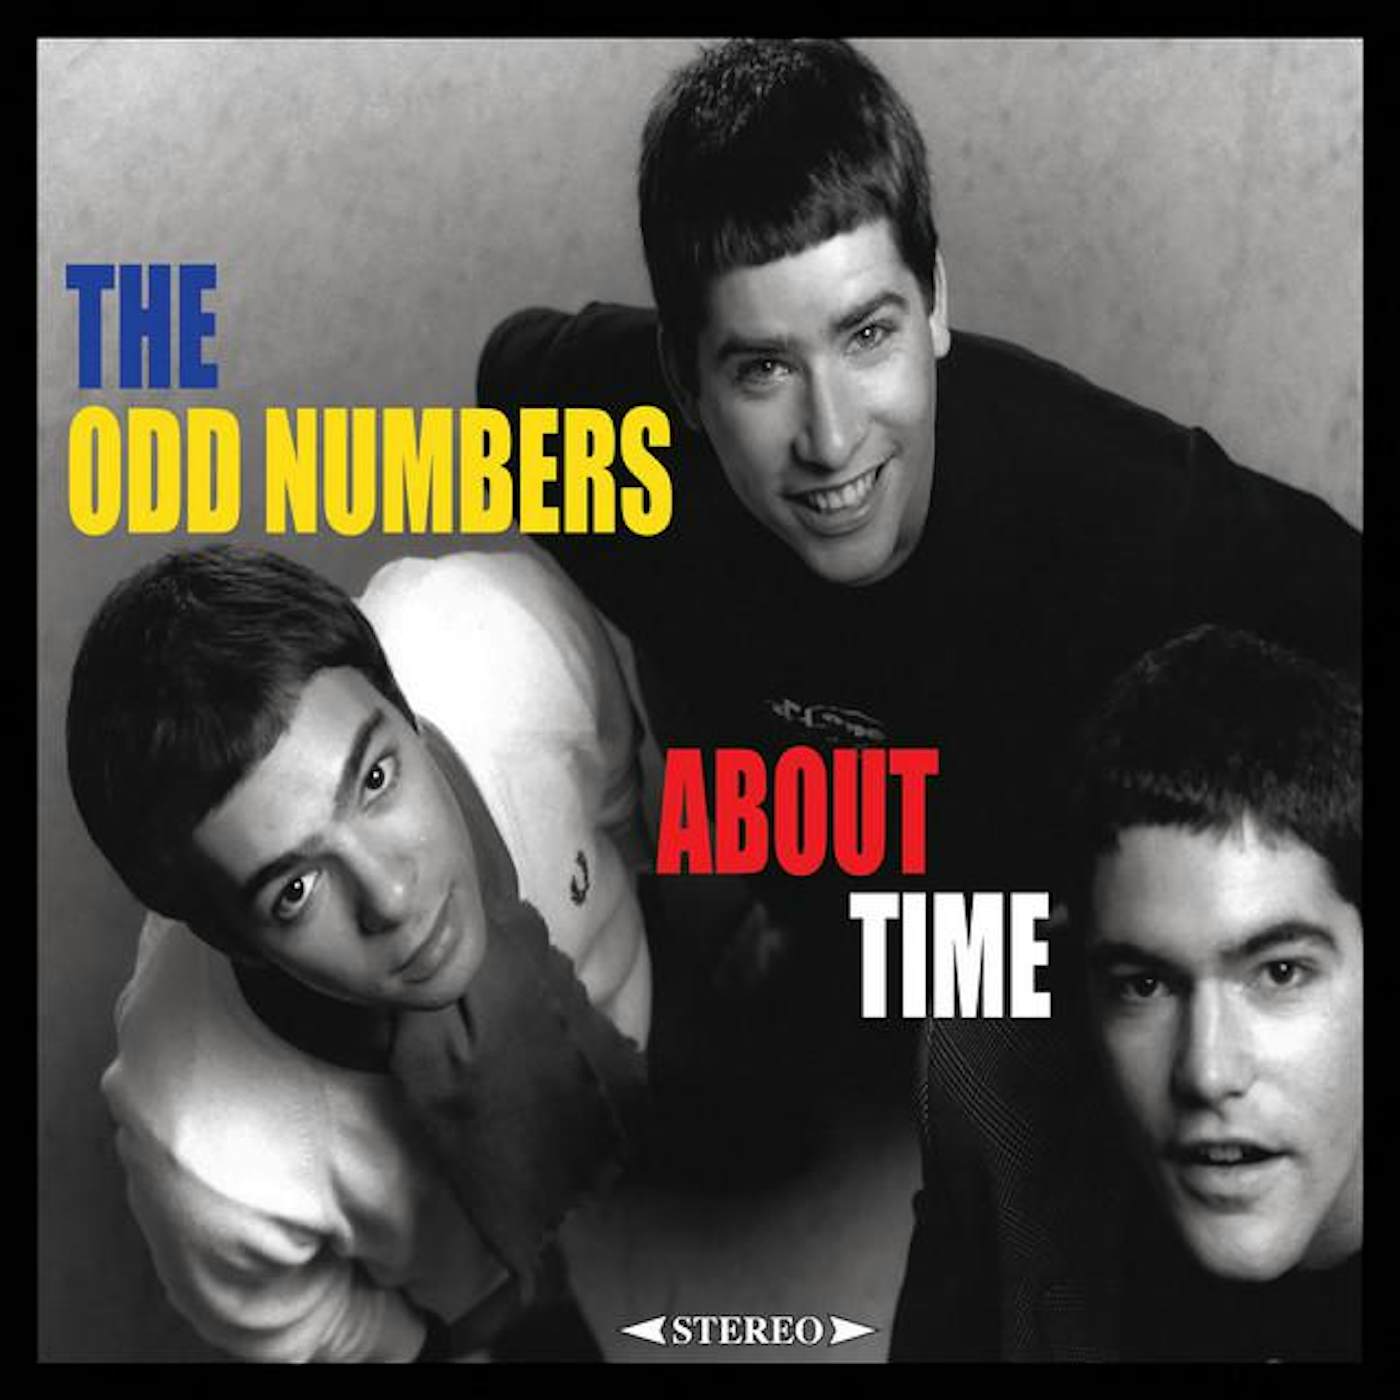 The Odd Numbers